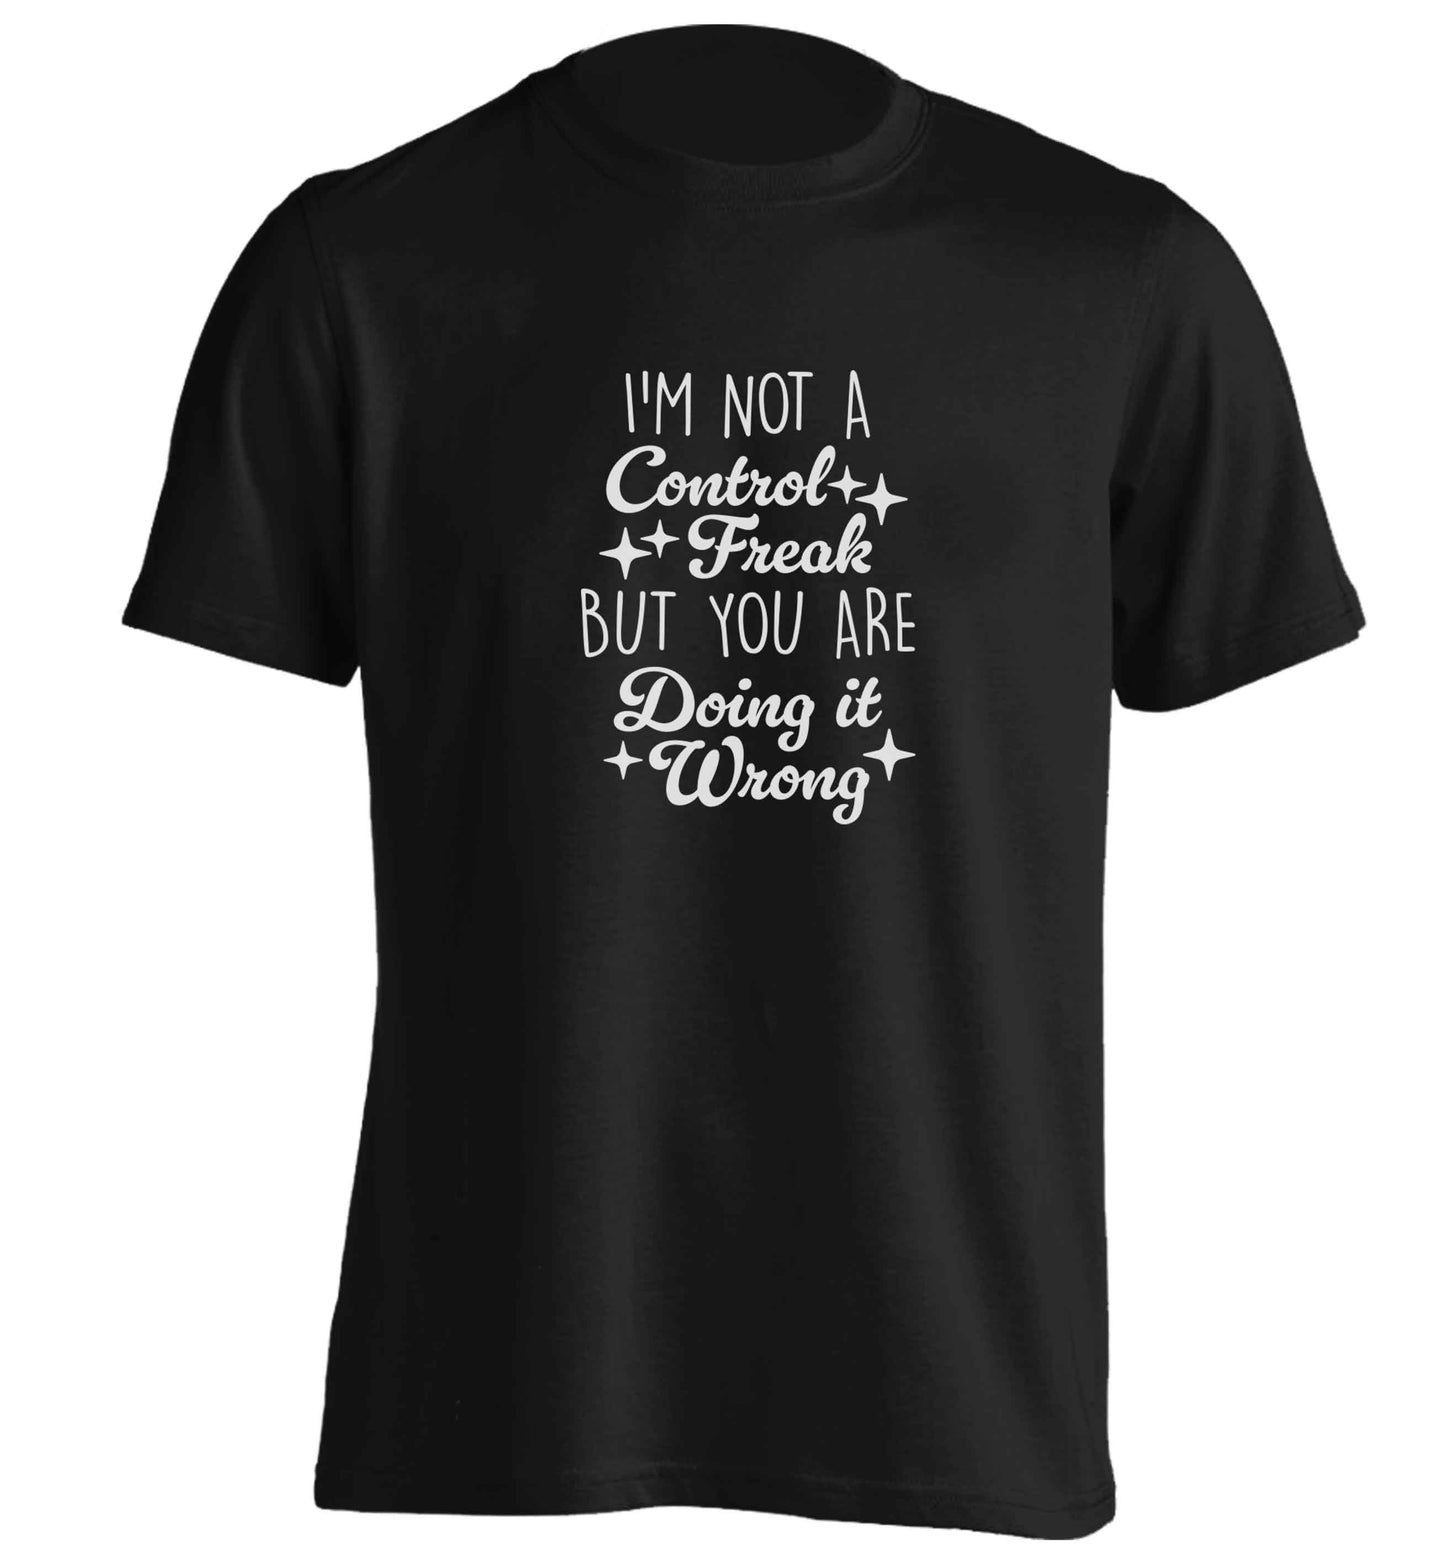 I'm not a control freak but you are doing it wrong adults unisex black Tshirt 2XL